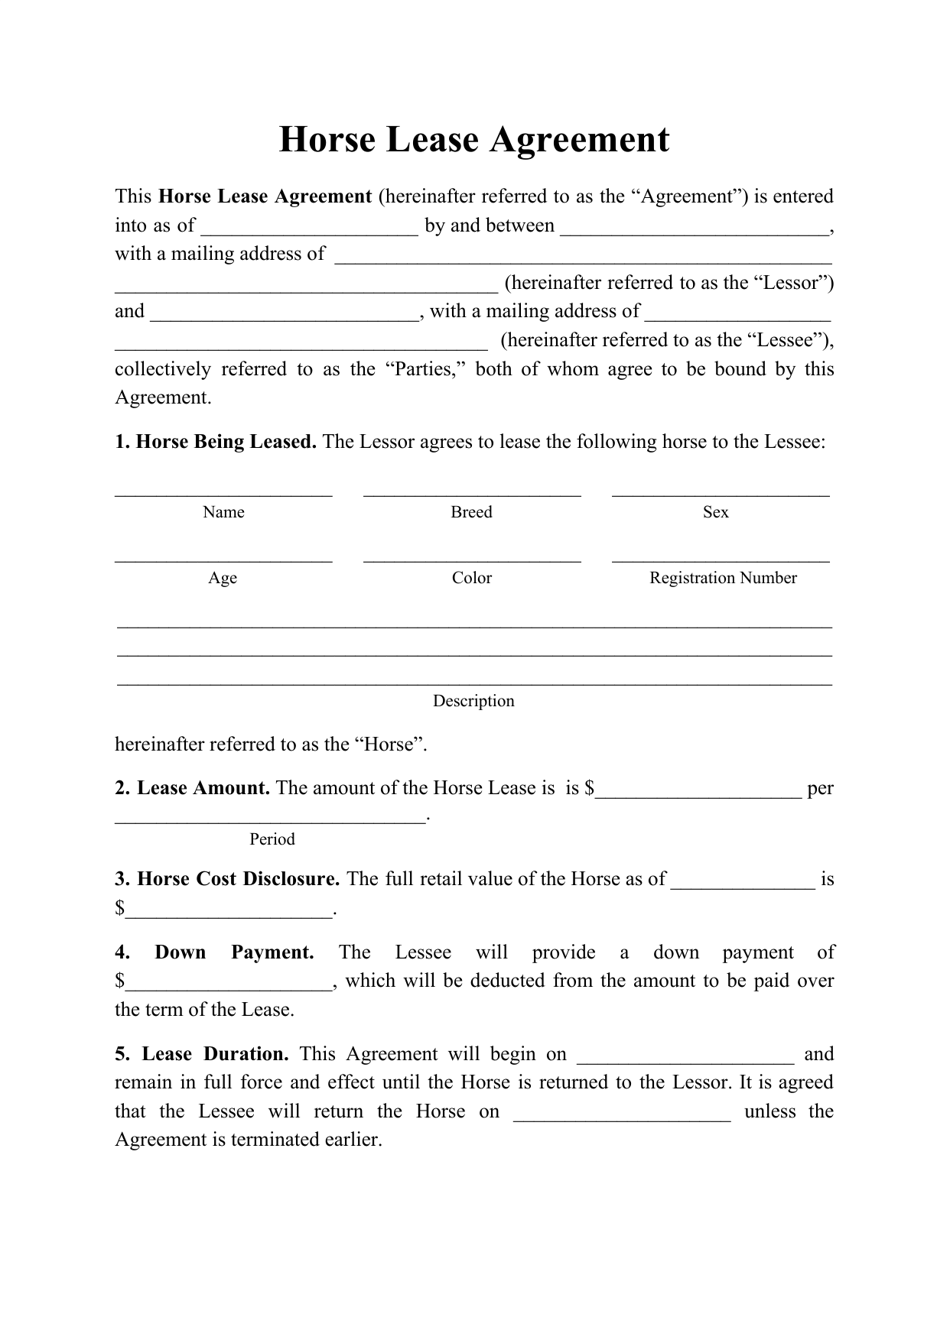 horse-lease-agreement-template-download-printable-pdf-templateroller